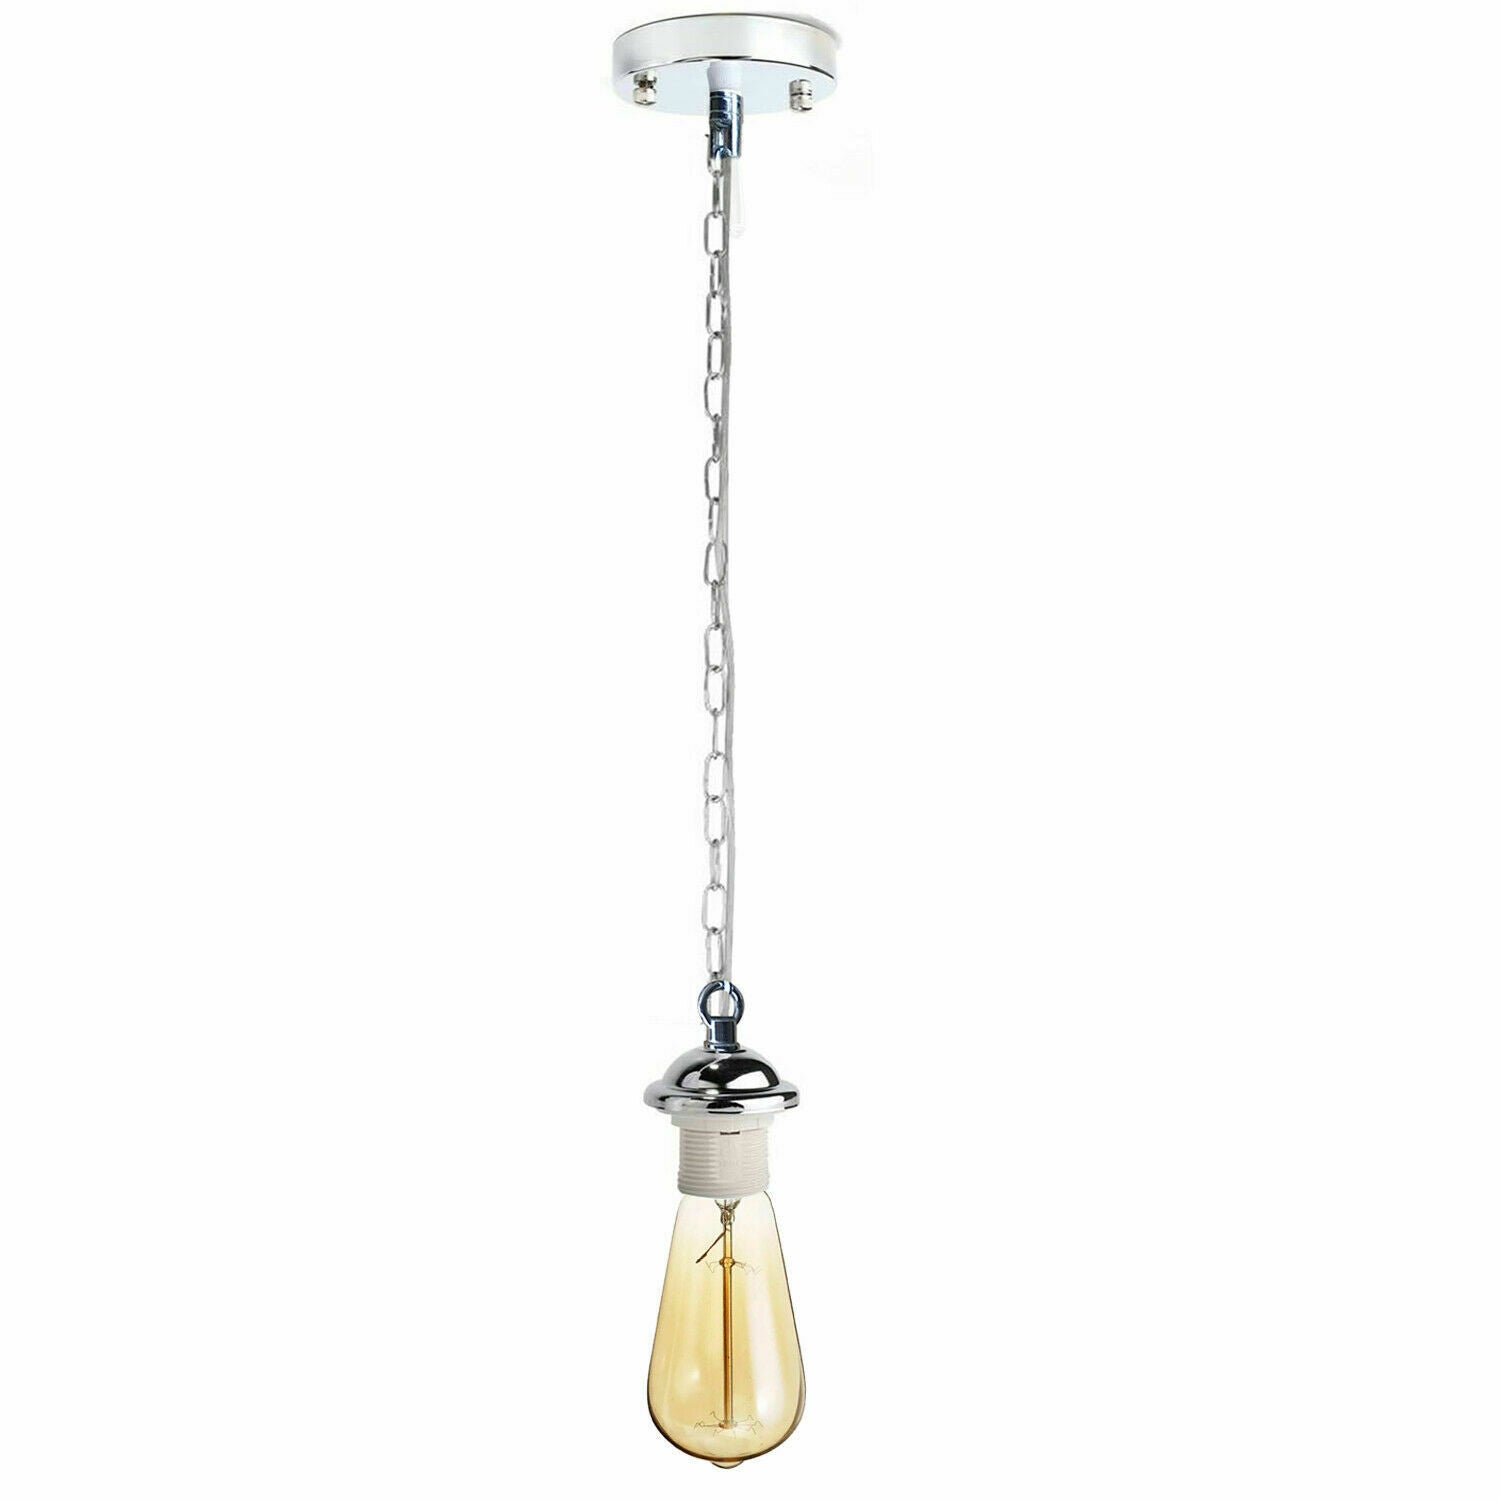 Brushed silver Metal Ceiing E27 Lamp Holder Pendant Light With Chain